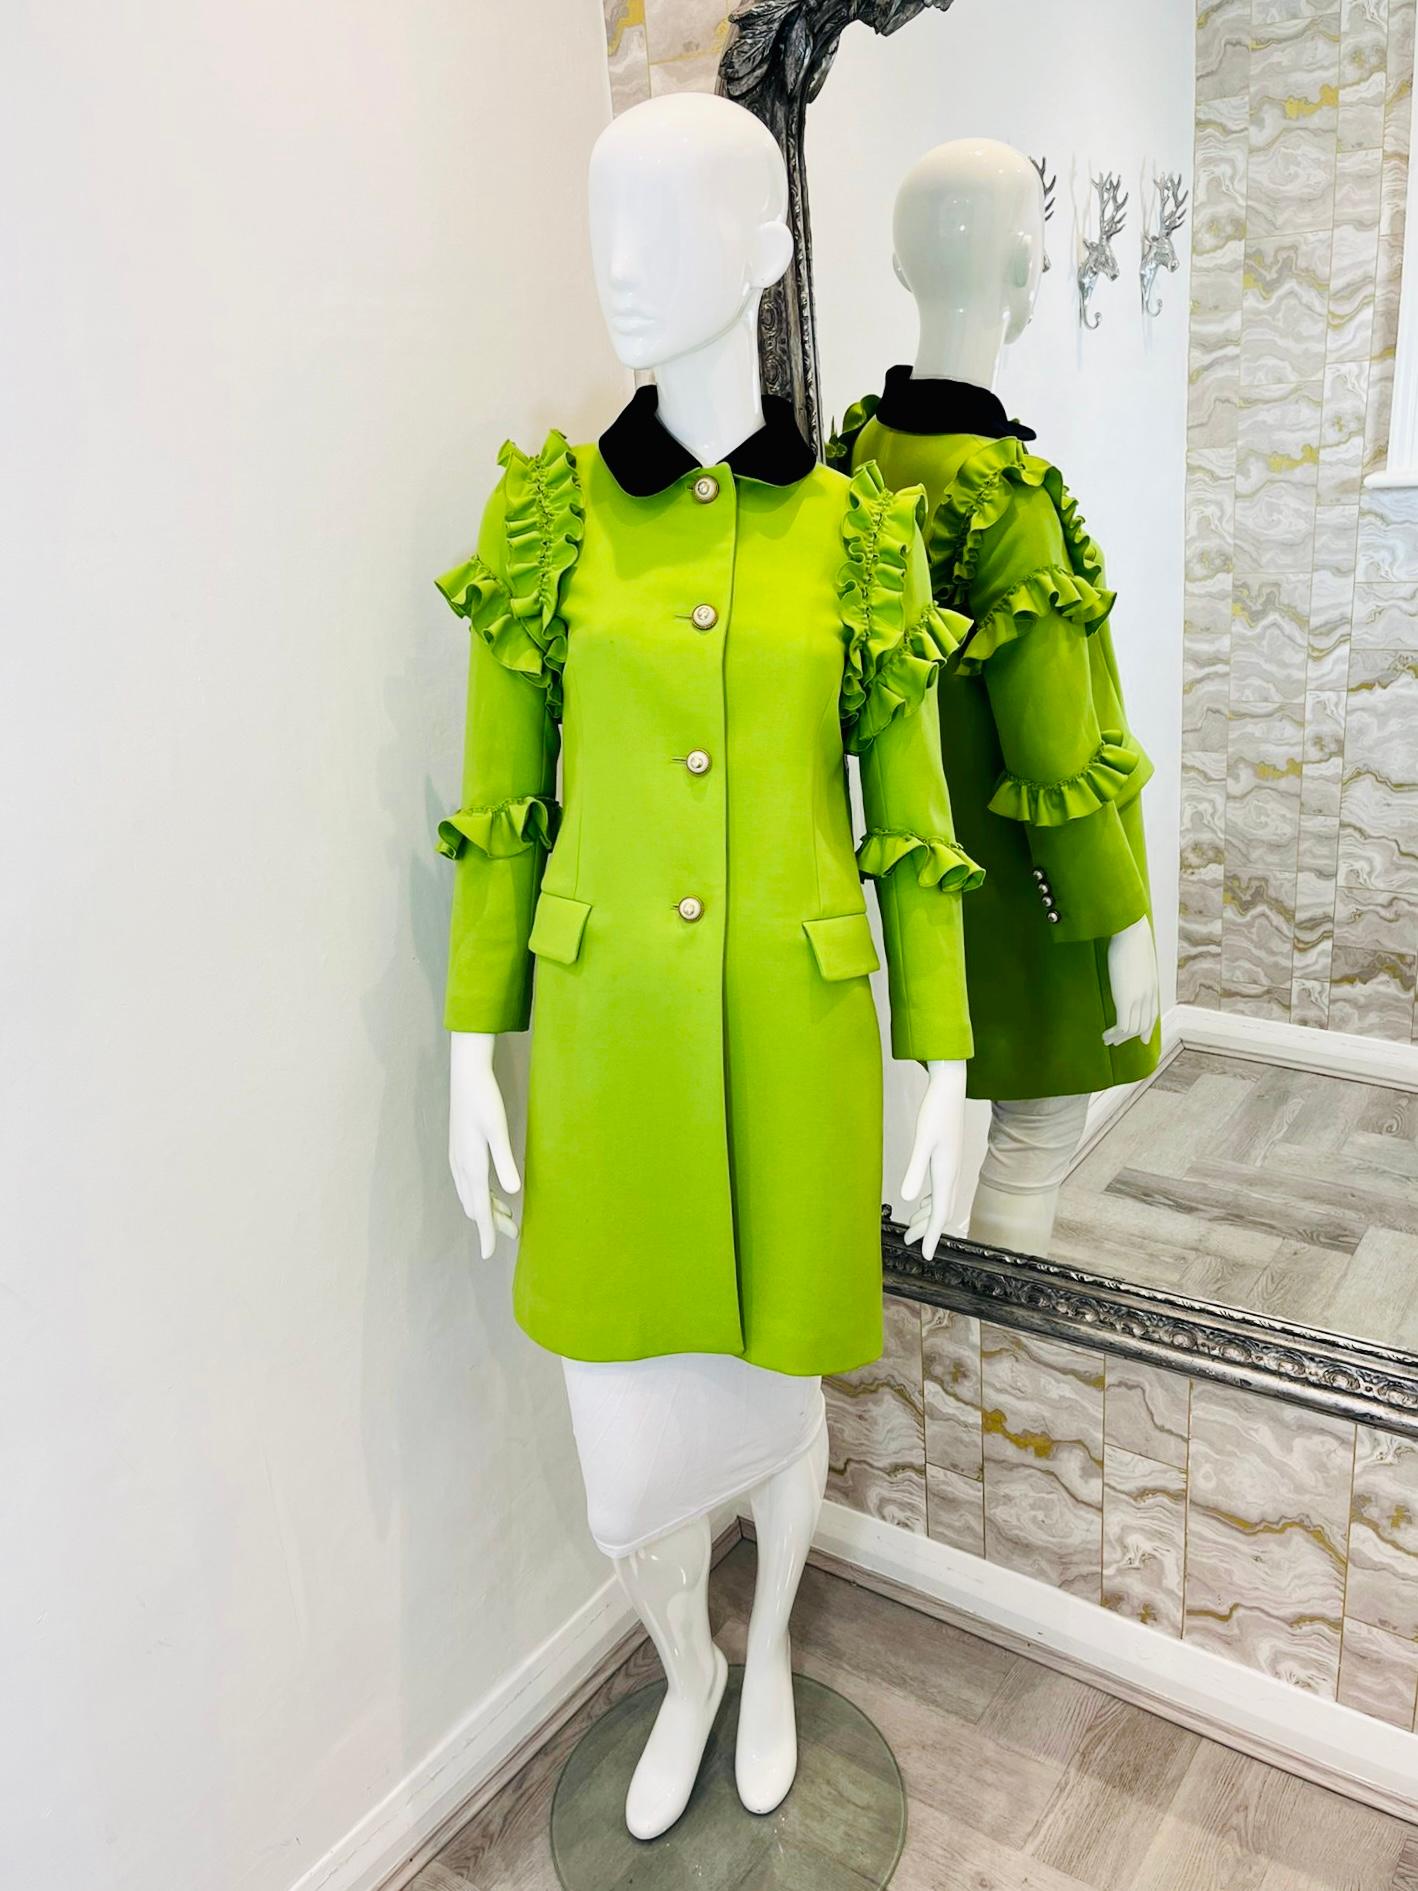 Gucci Silk & Wool Ruffle Trim Coat 

Runway collection 2017/18. Bright green coat with black velvet collar,

'GG' logo pearl buttons to closure and cuffs. Ruffle trim to shoulders

and arms. Rrp approx £3250.

Size - 40IT

Condition